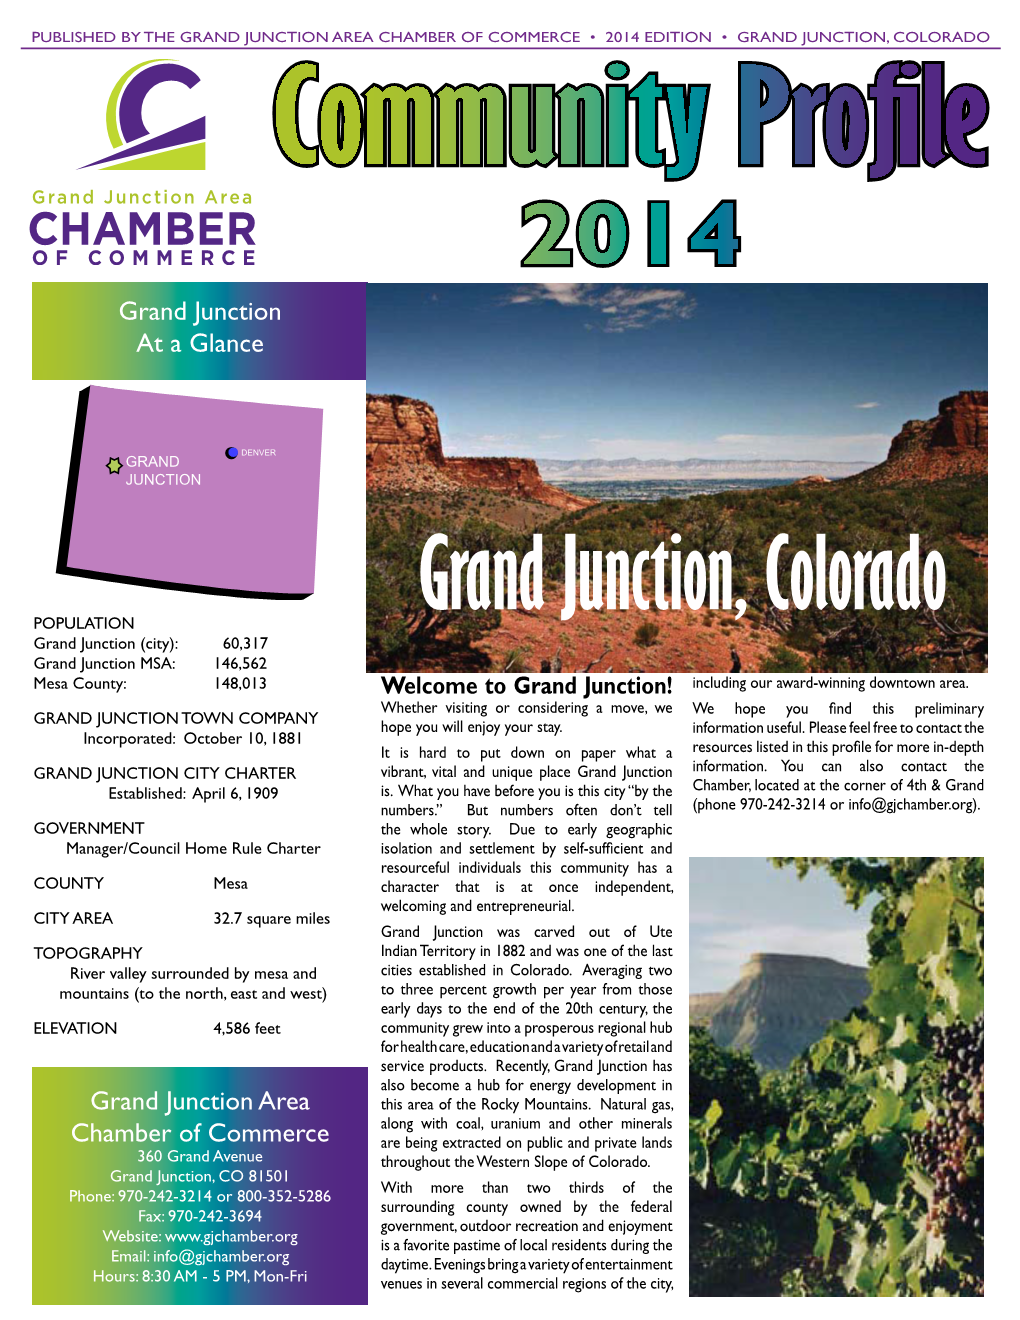 Grand Junction, Colorado Community Profile 2014 Grand Junction at a Glance